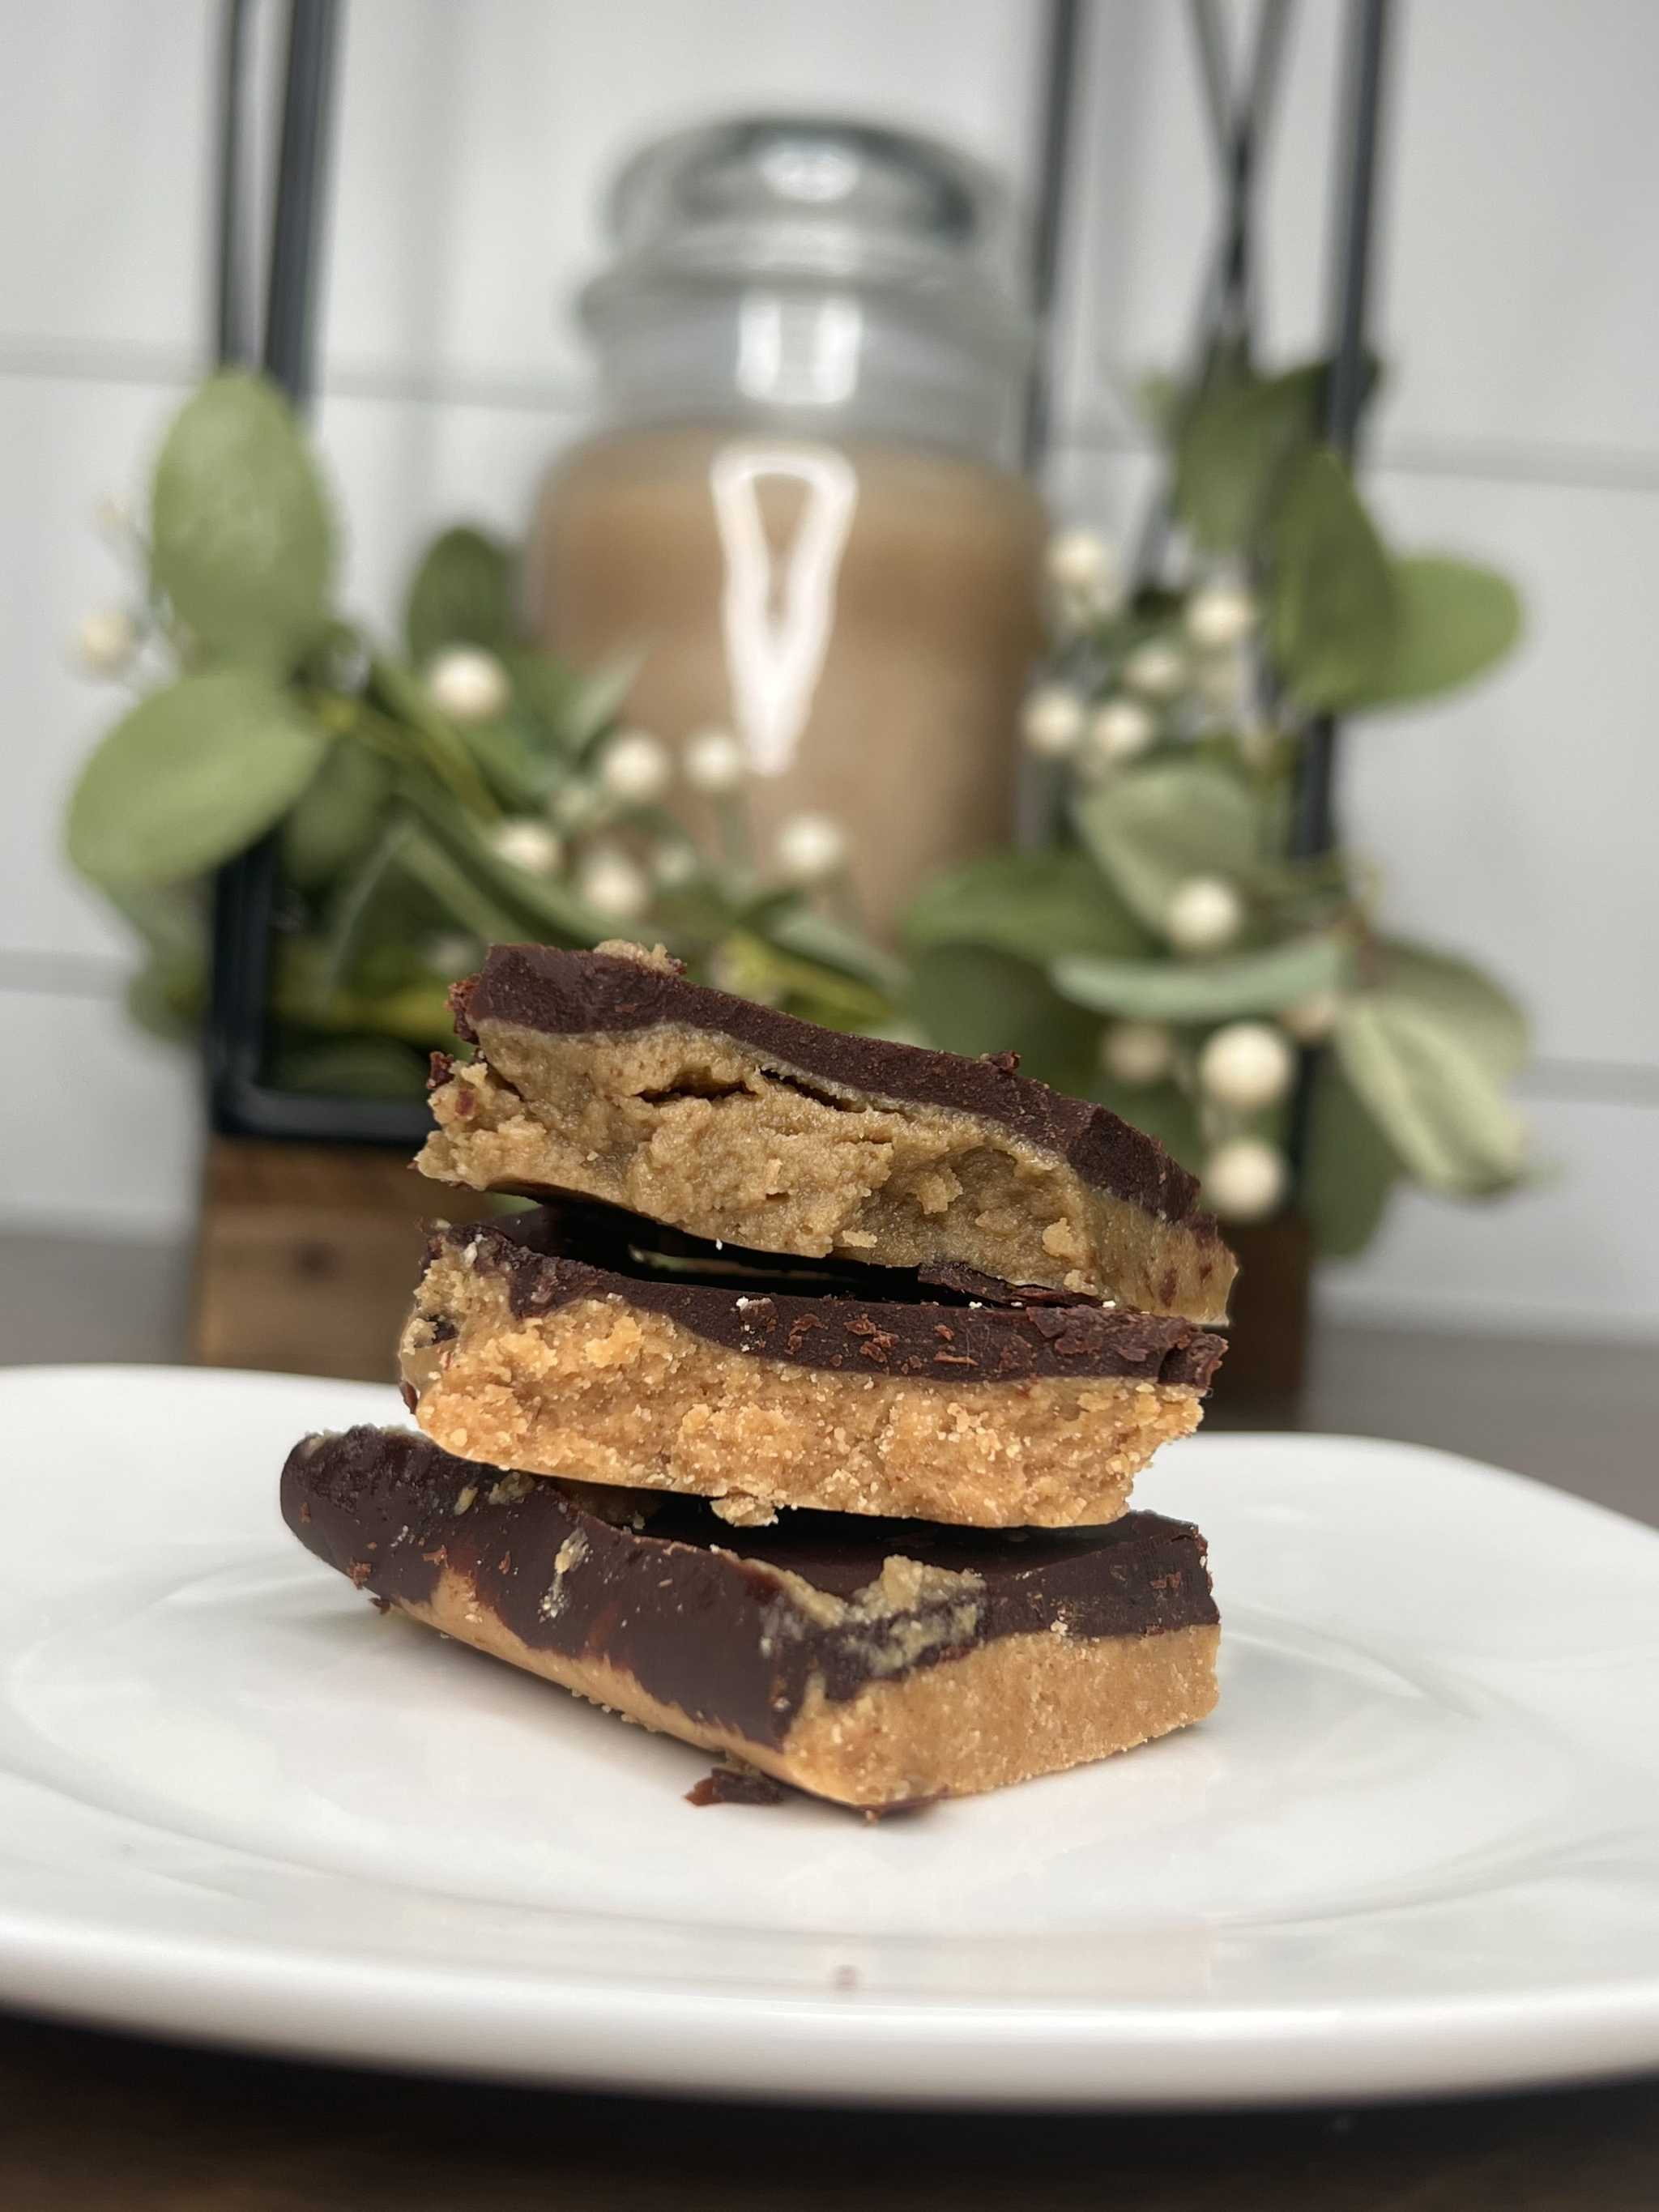 Picture of chocolate peanut butter bars